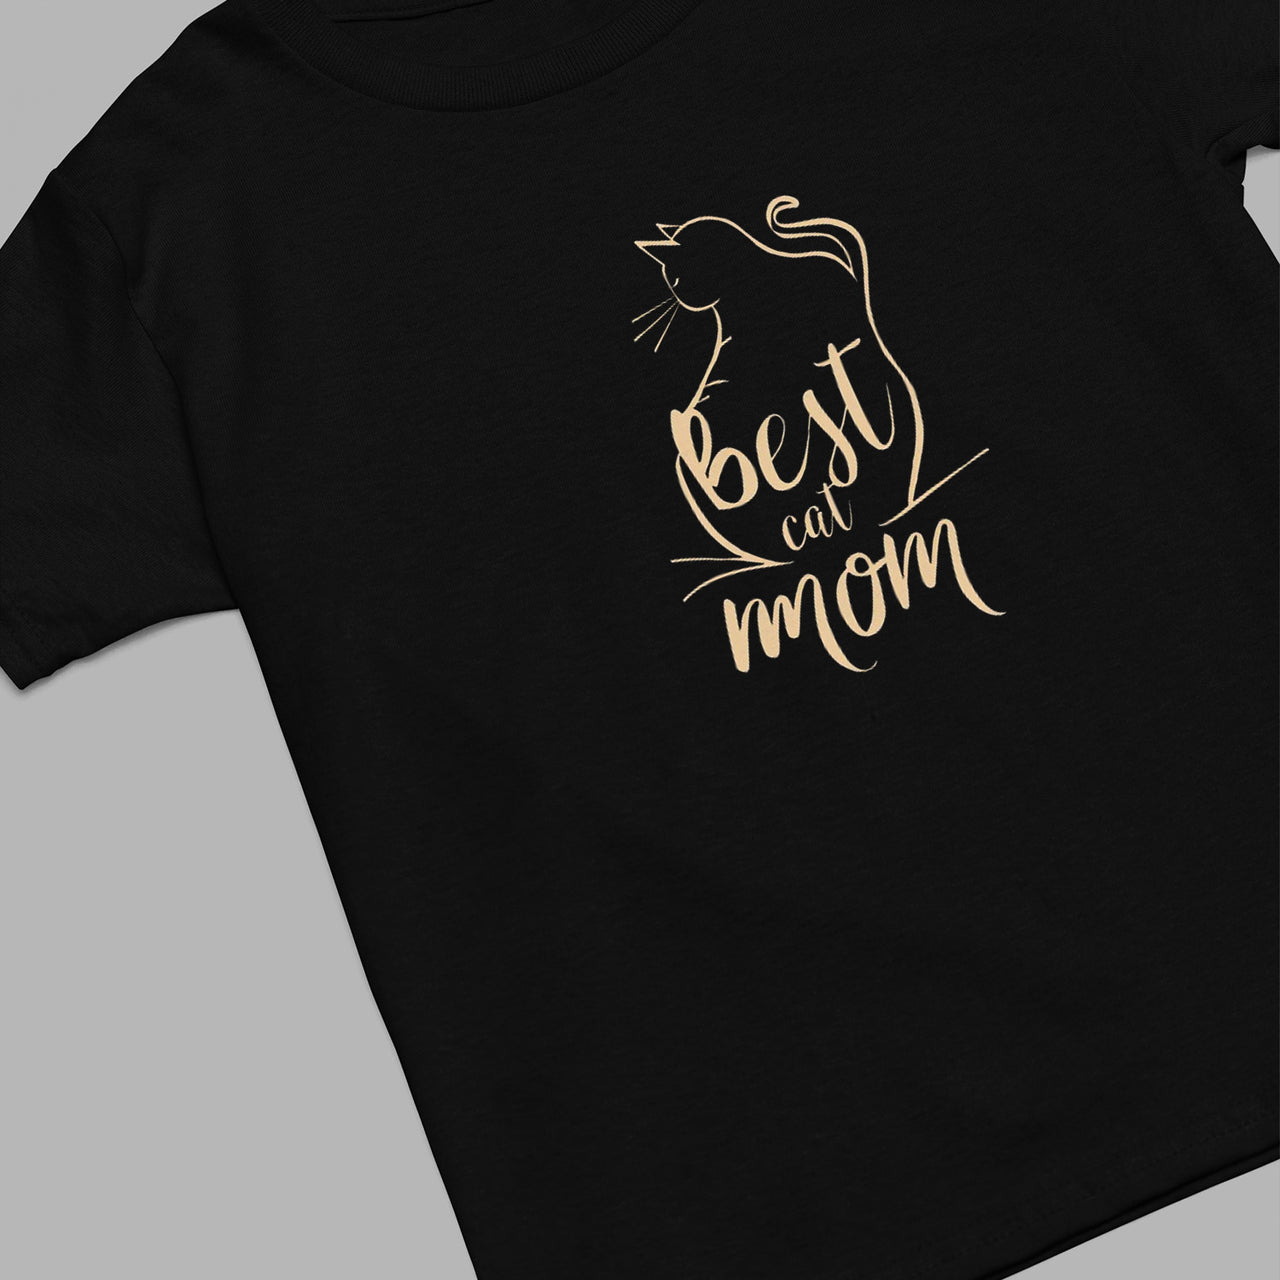 Best Cat Mom Ever Shirt, Best Cat Mom Shirt, Pet Lover Shirt, Cat Lover Shirt, Best Cat Mom Ever, Cat Owner Shirt, Gift For Cat Mom, Funny Cat Shirts, Women Cat T-Shirt, Mother's Day Gift, Cat Lover Wife Gifts, Cat Shirt 01